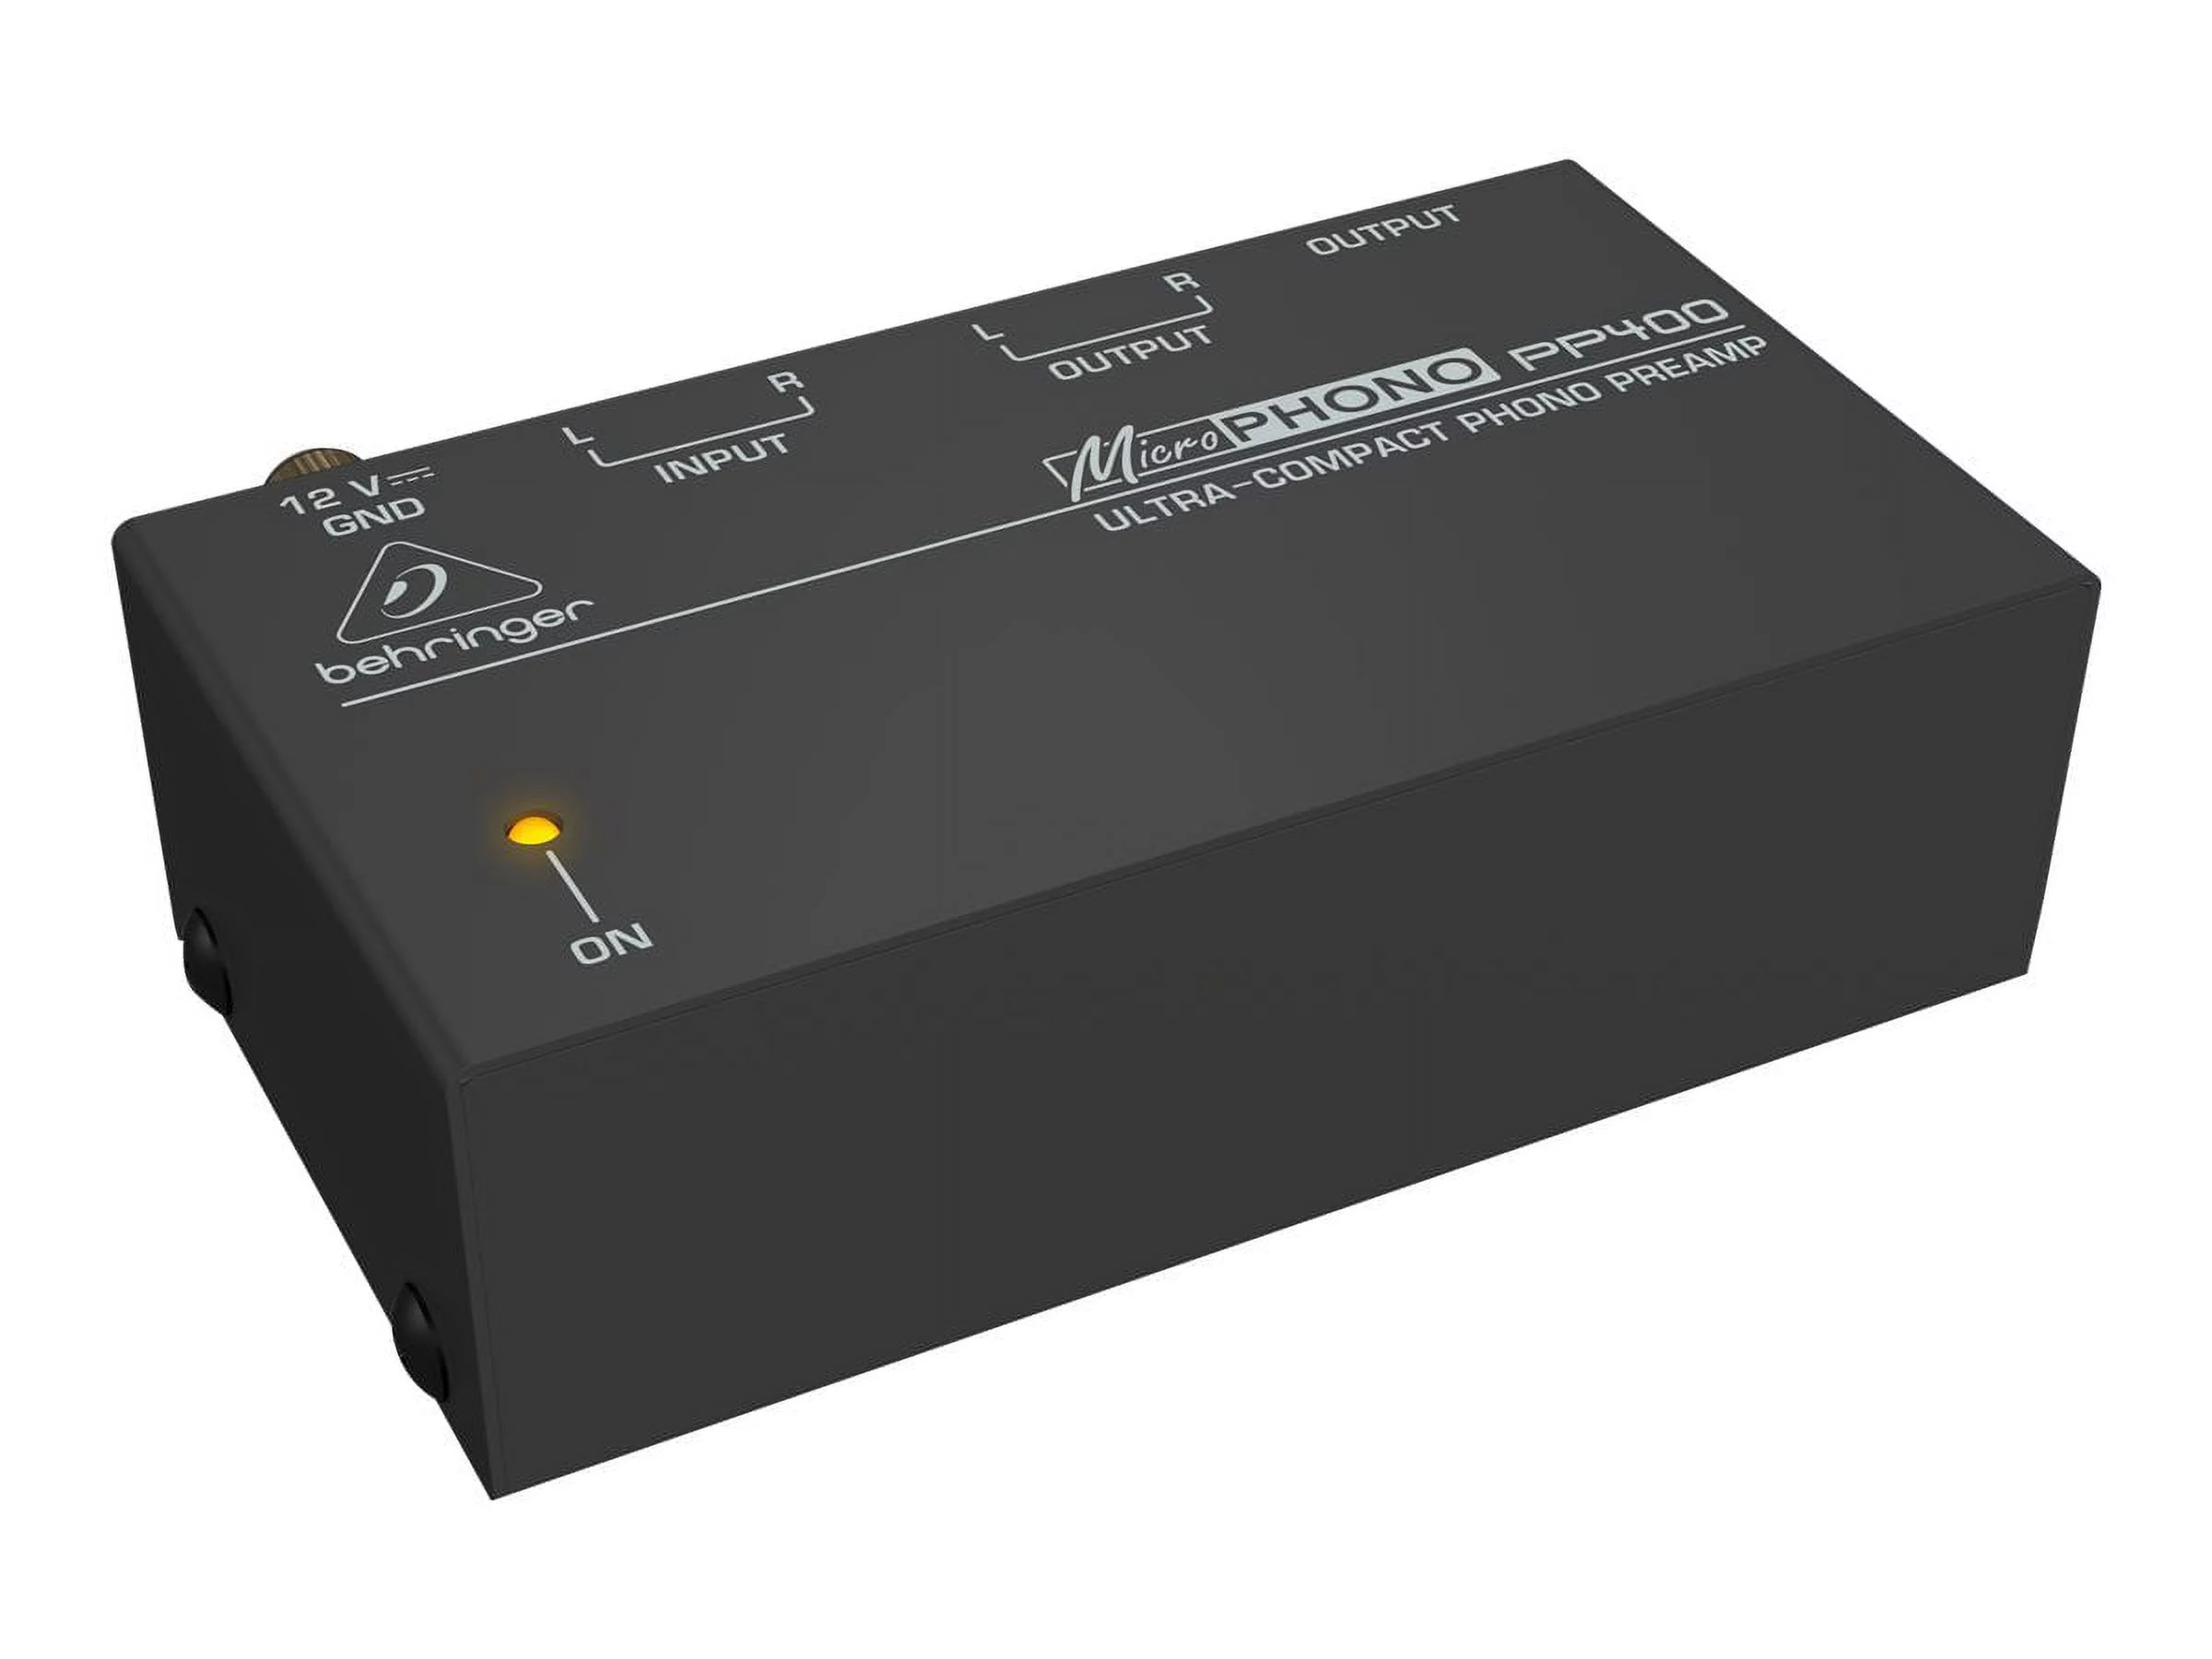 Microphono PP400